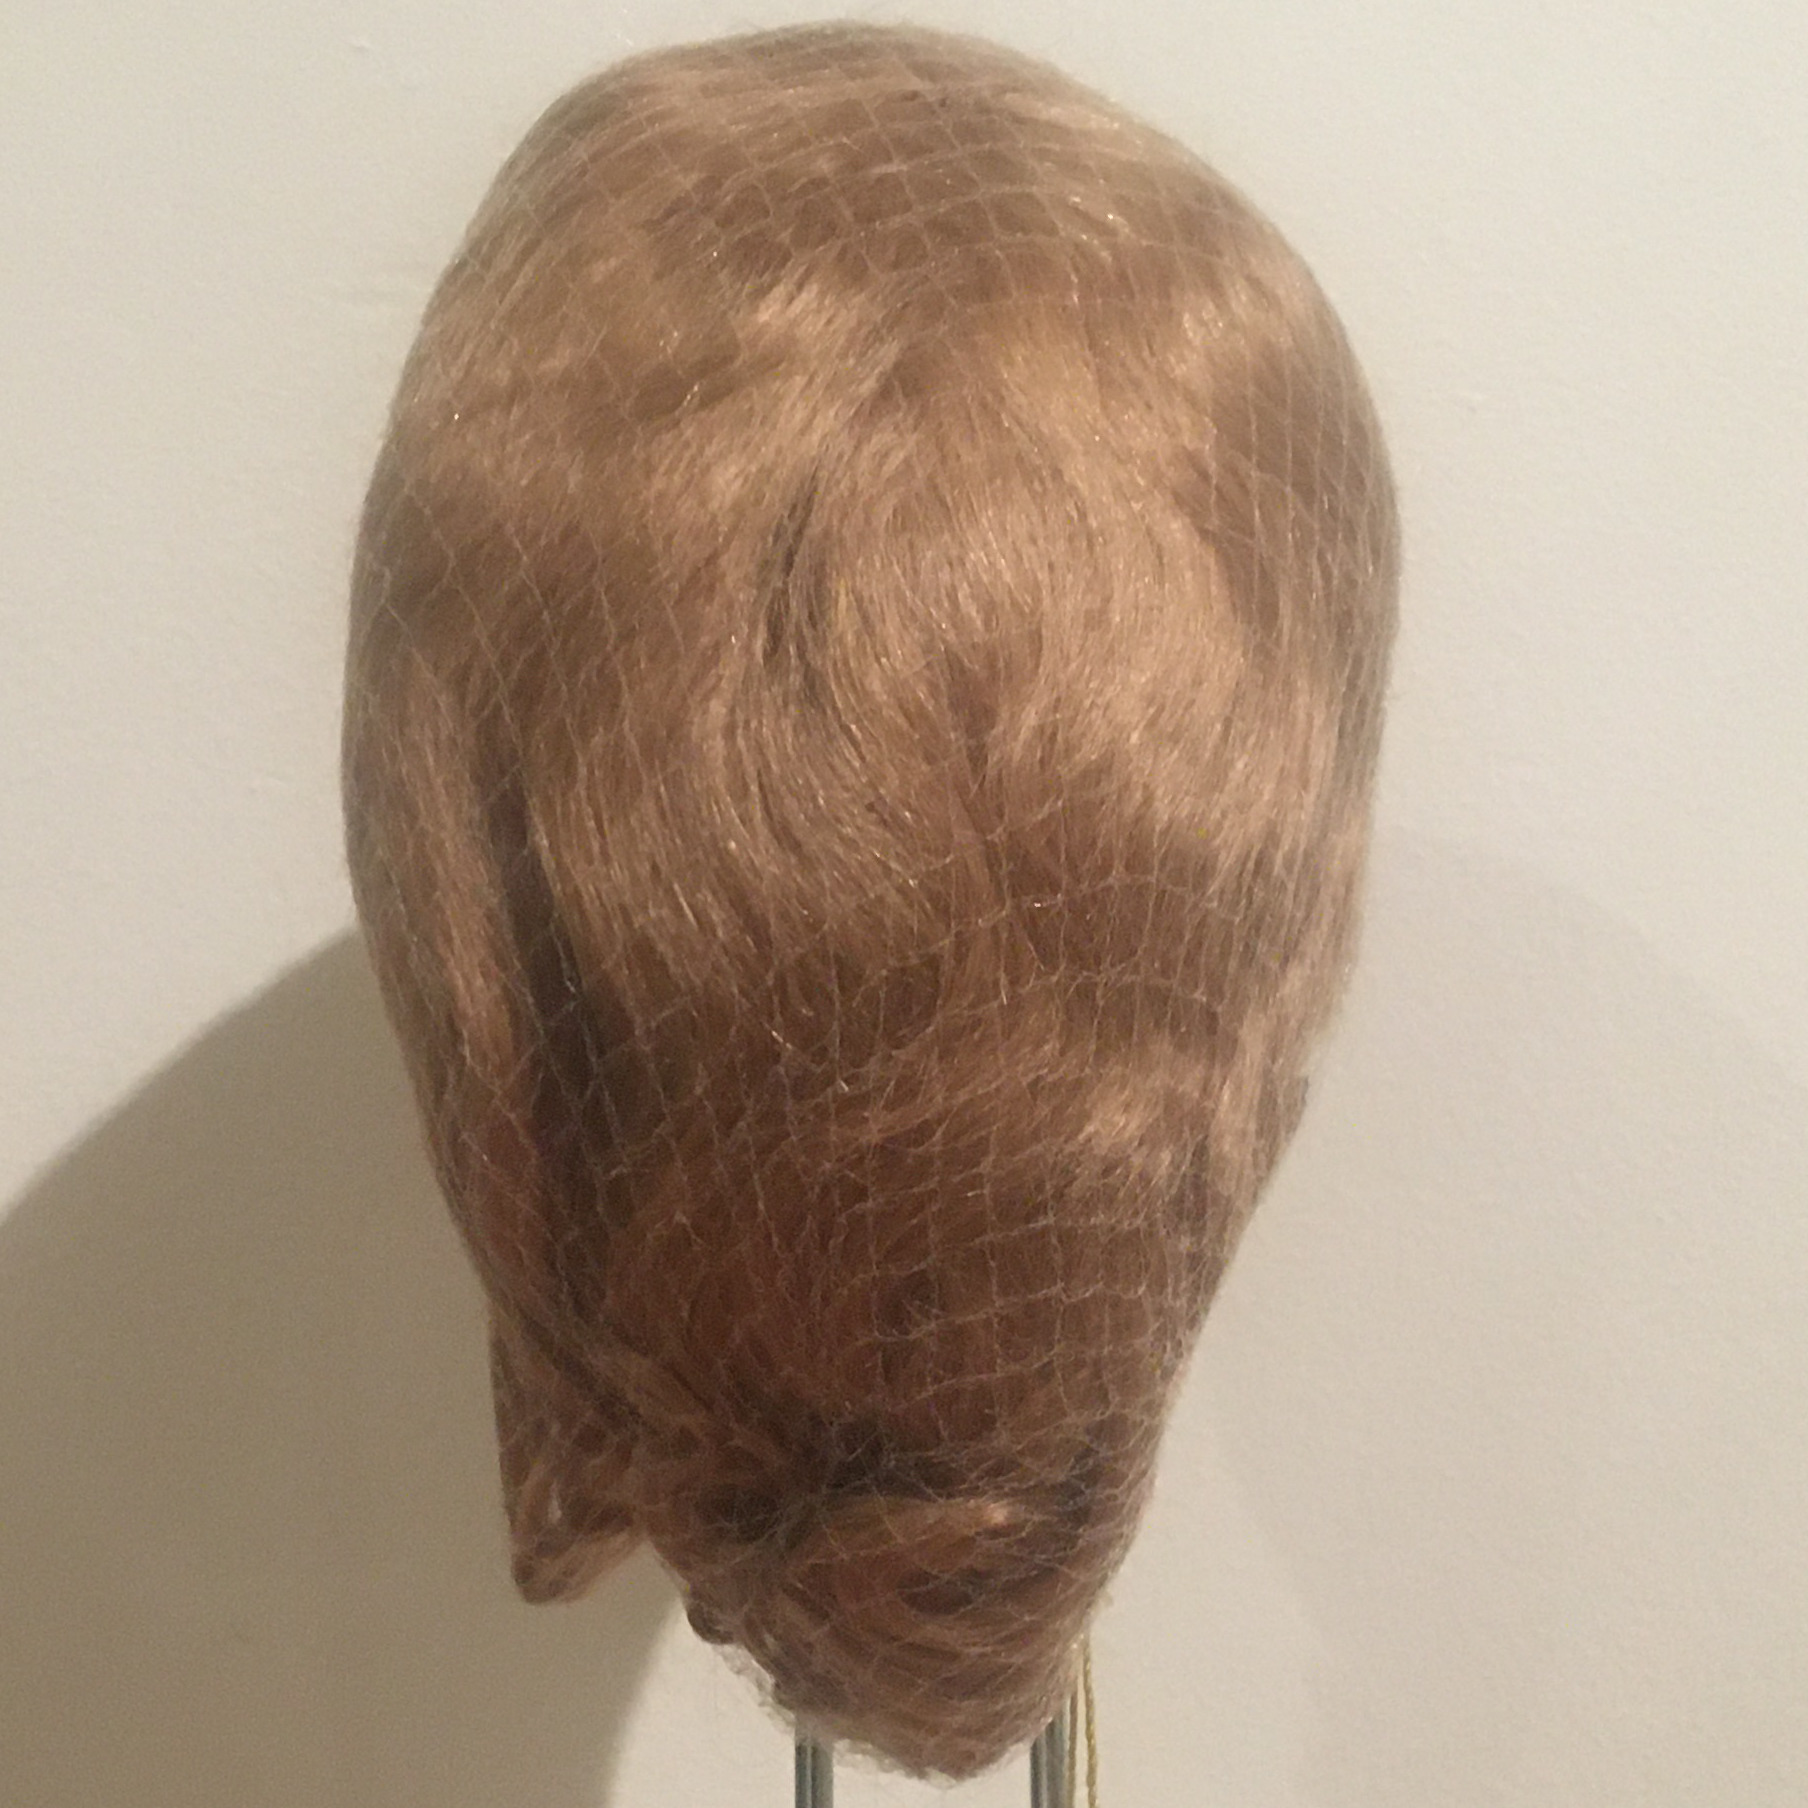 Reddish-blond or light red medium-length wig with short bangs, straight with slight wave, contained in a hair net